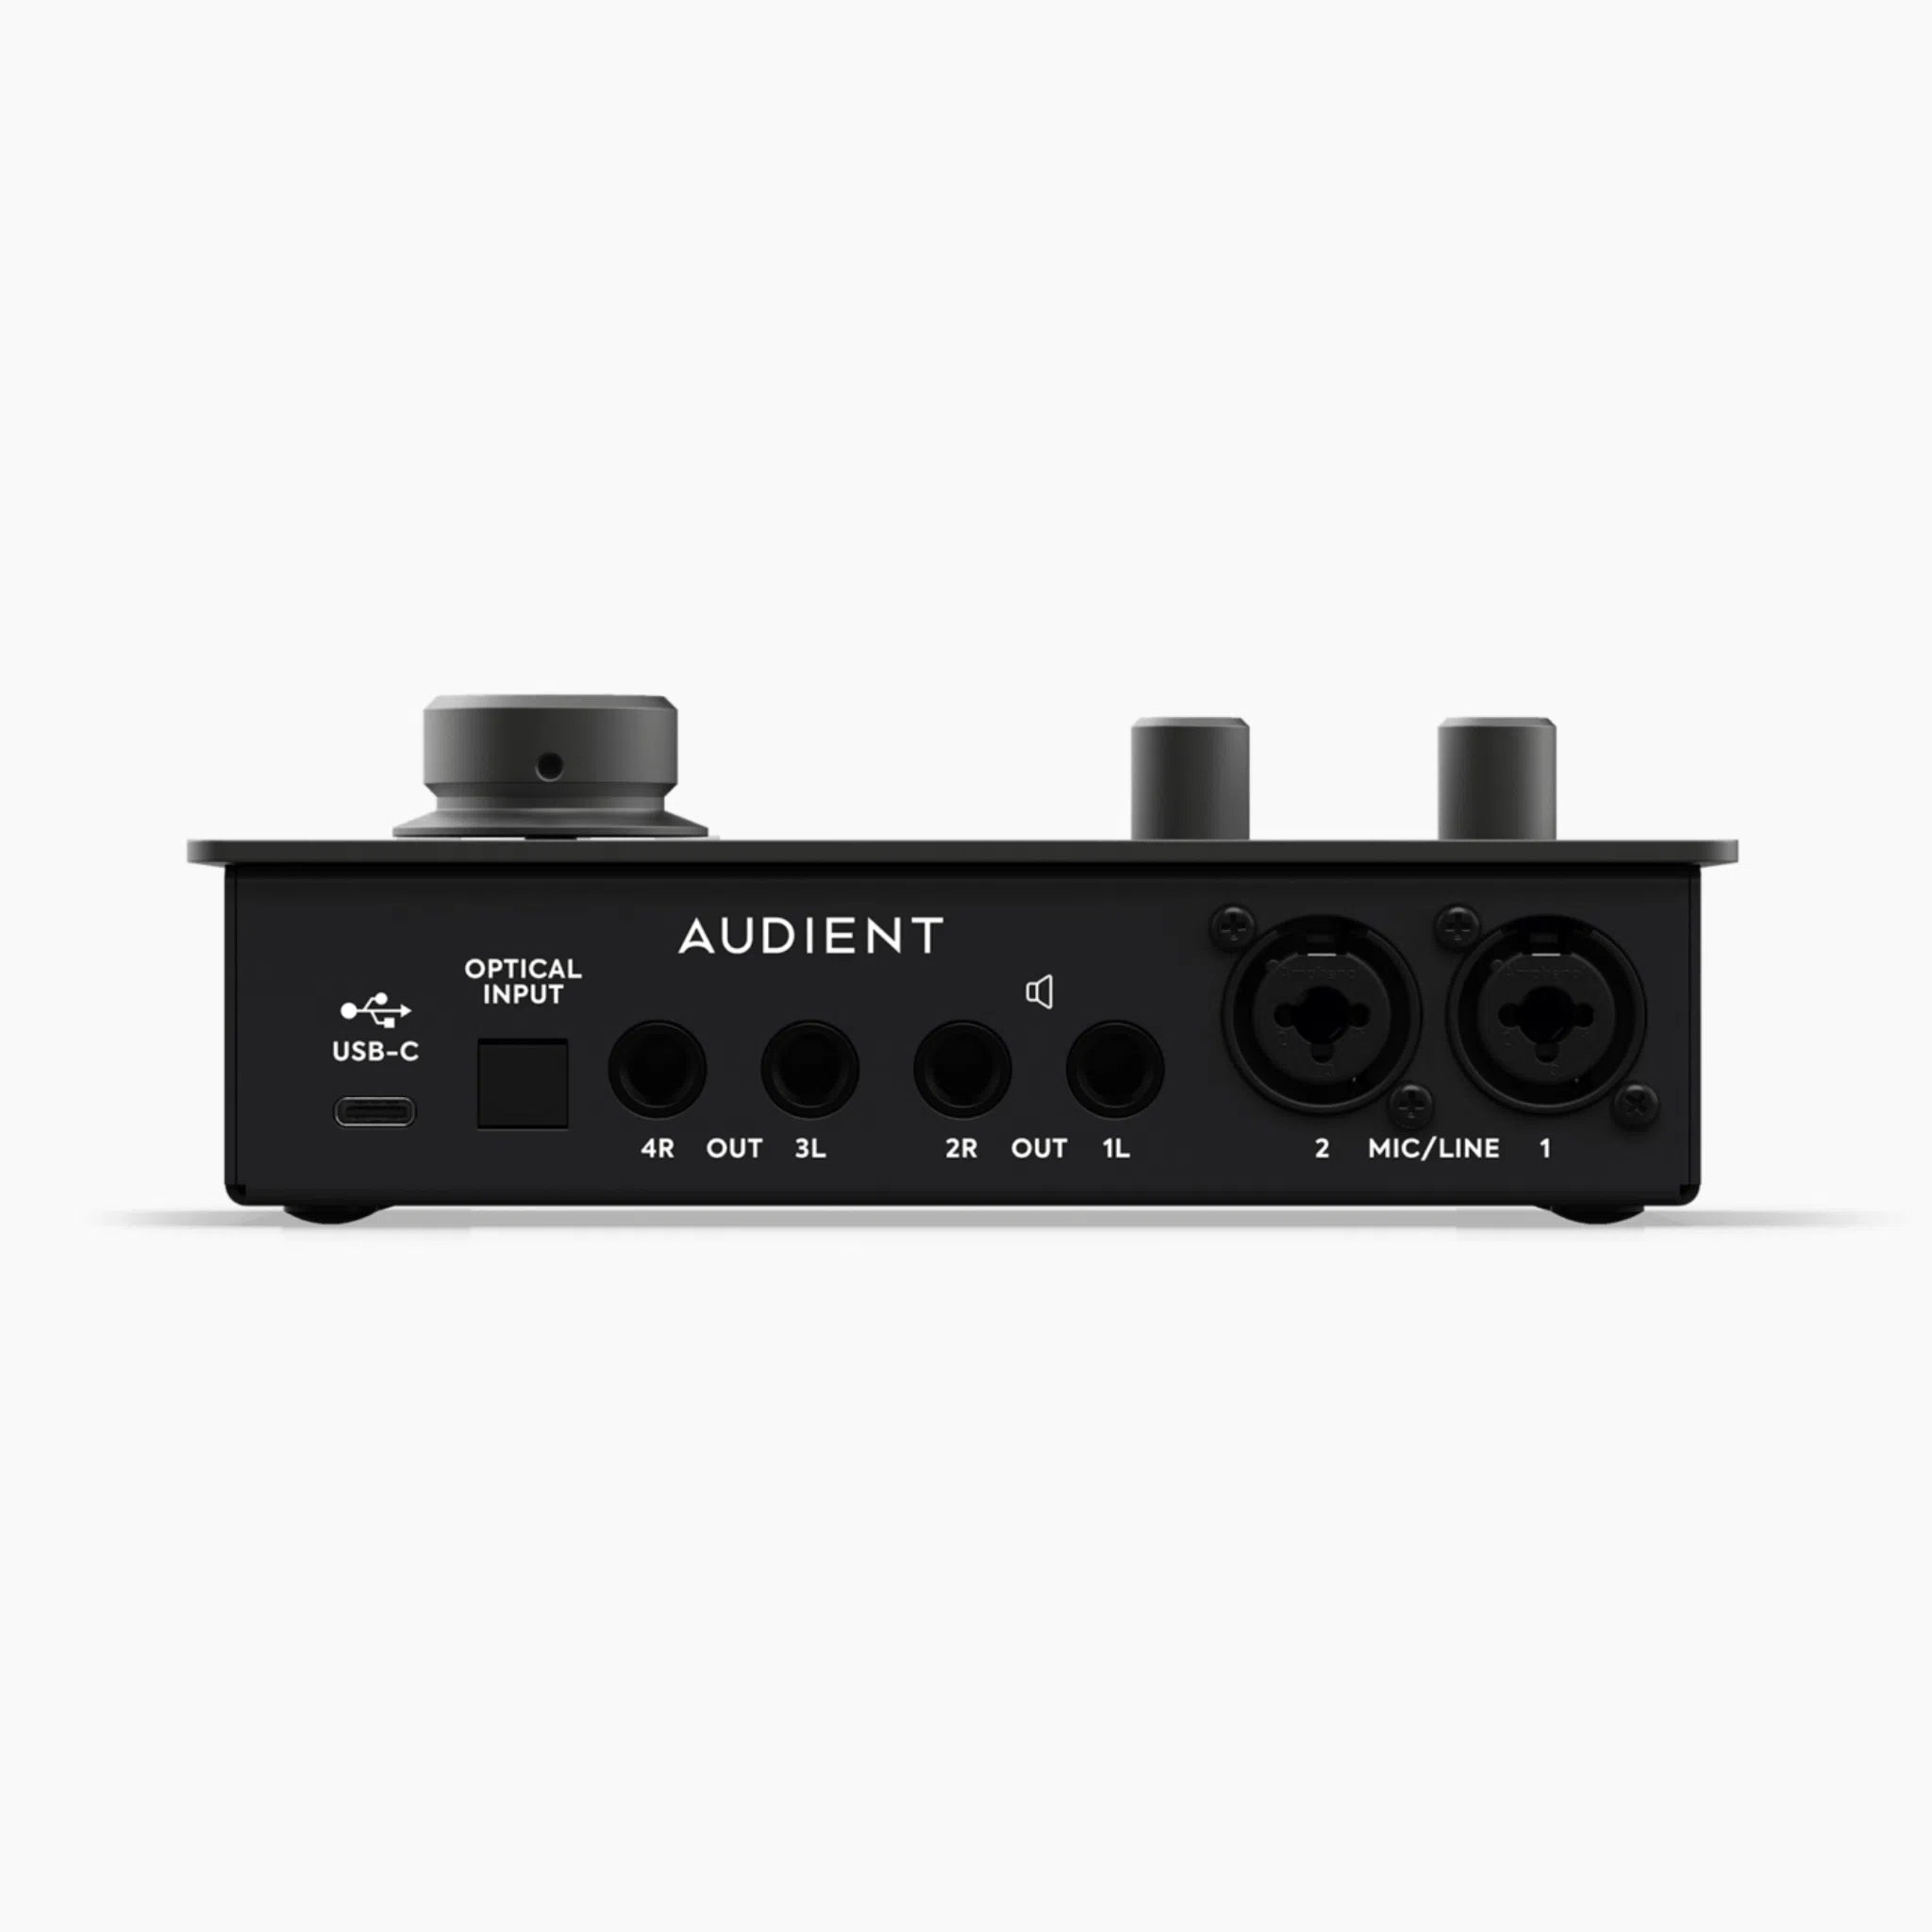 AUDIENT ID14 MKII